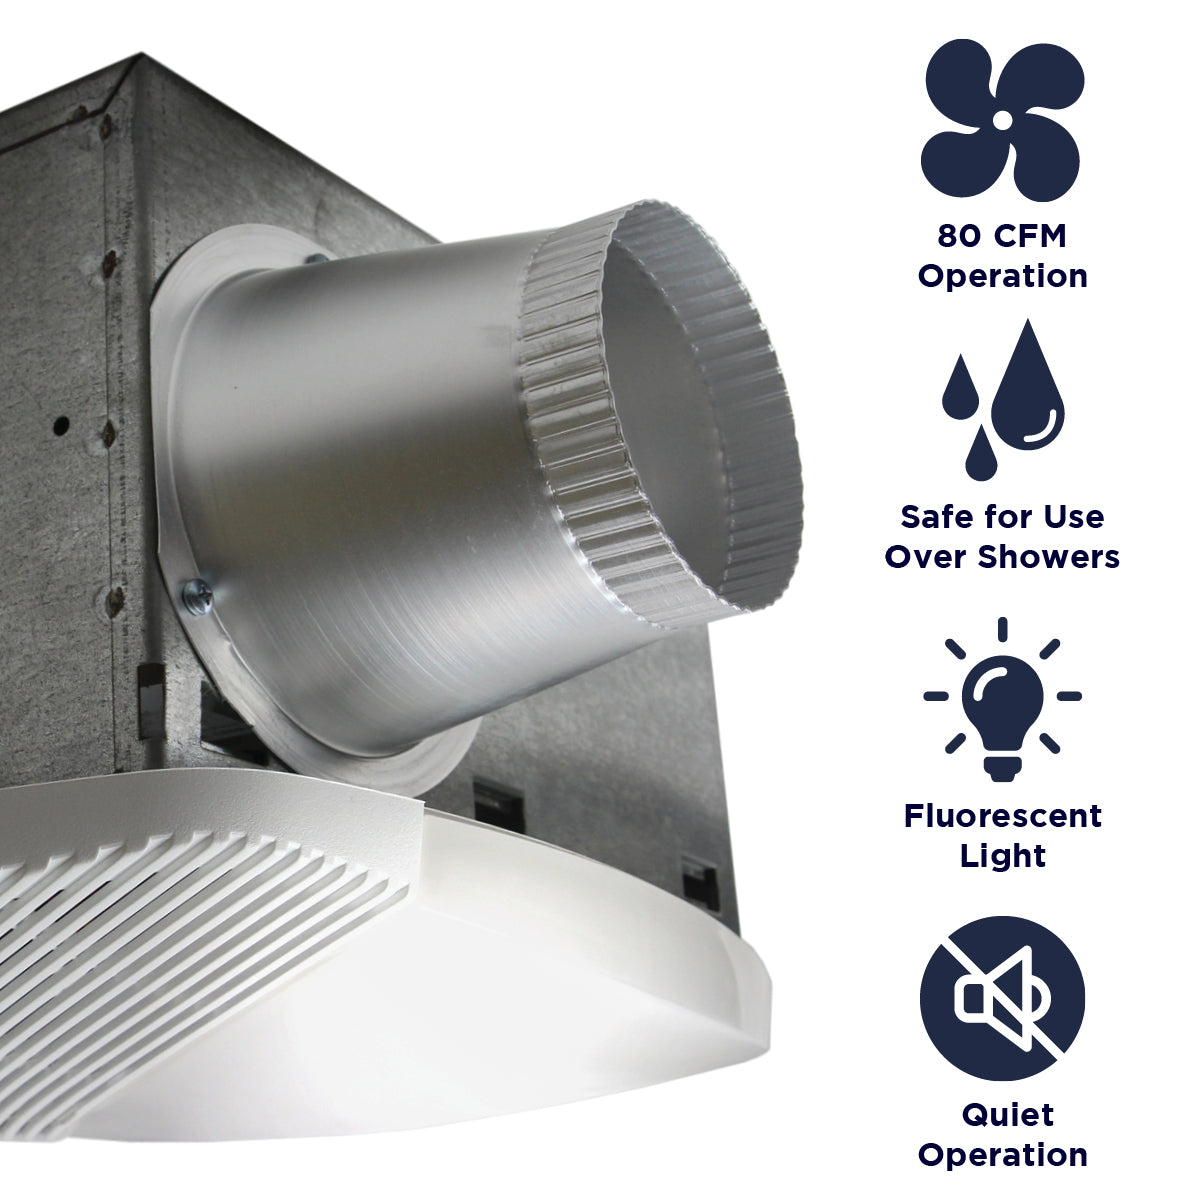 NuVent SH Series Lighted Ceiling Exhaust Bath Fans